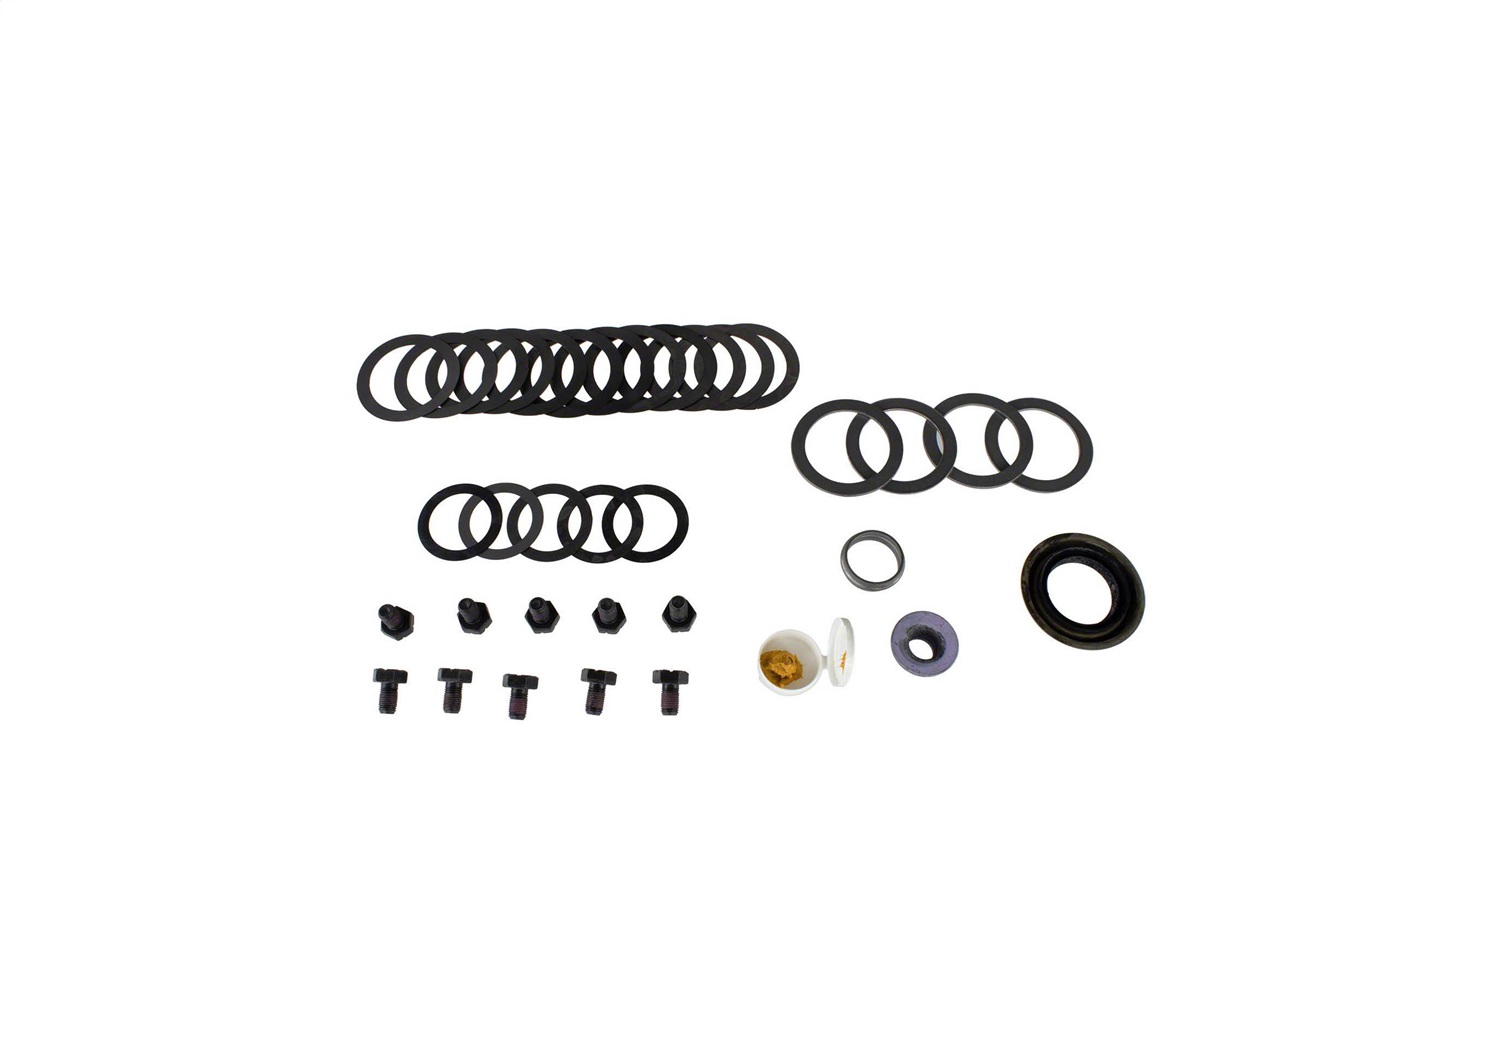 Ford Racing Ford Racing M-4210-A 8.8 in. Ring And Pinion Installation Kit Fits 86-03 Mustang